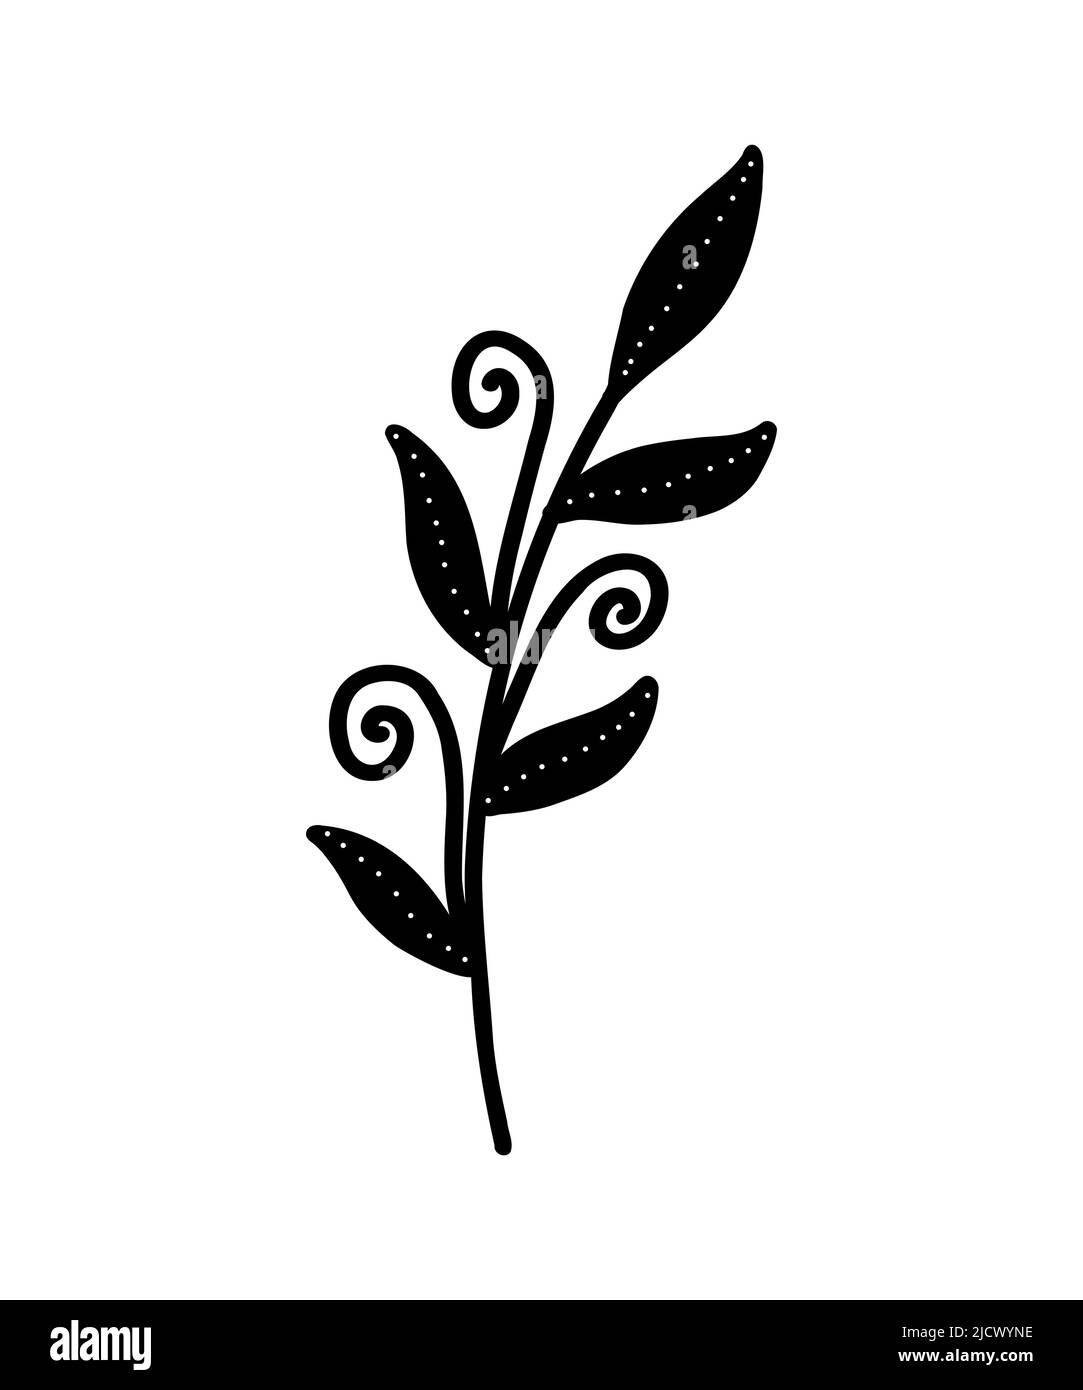 Vector Branch Icon. Tree Branch. Tree Branch Silhouette Icon, Clip Art,  Doodle Style. Hand Drawing. Floral Decorative Branch Of A Plant With Leaves  Stock Vector Image & Art - Alamy